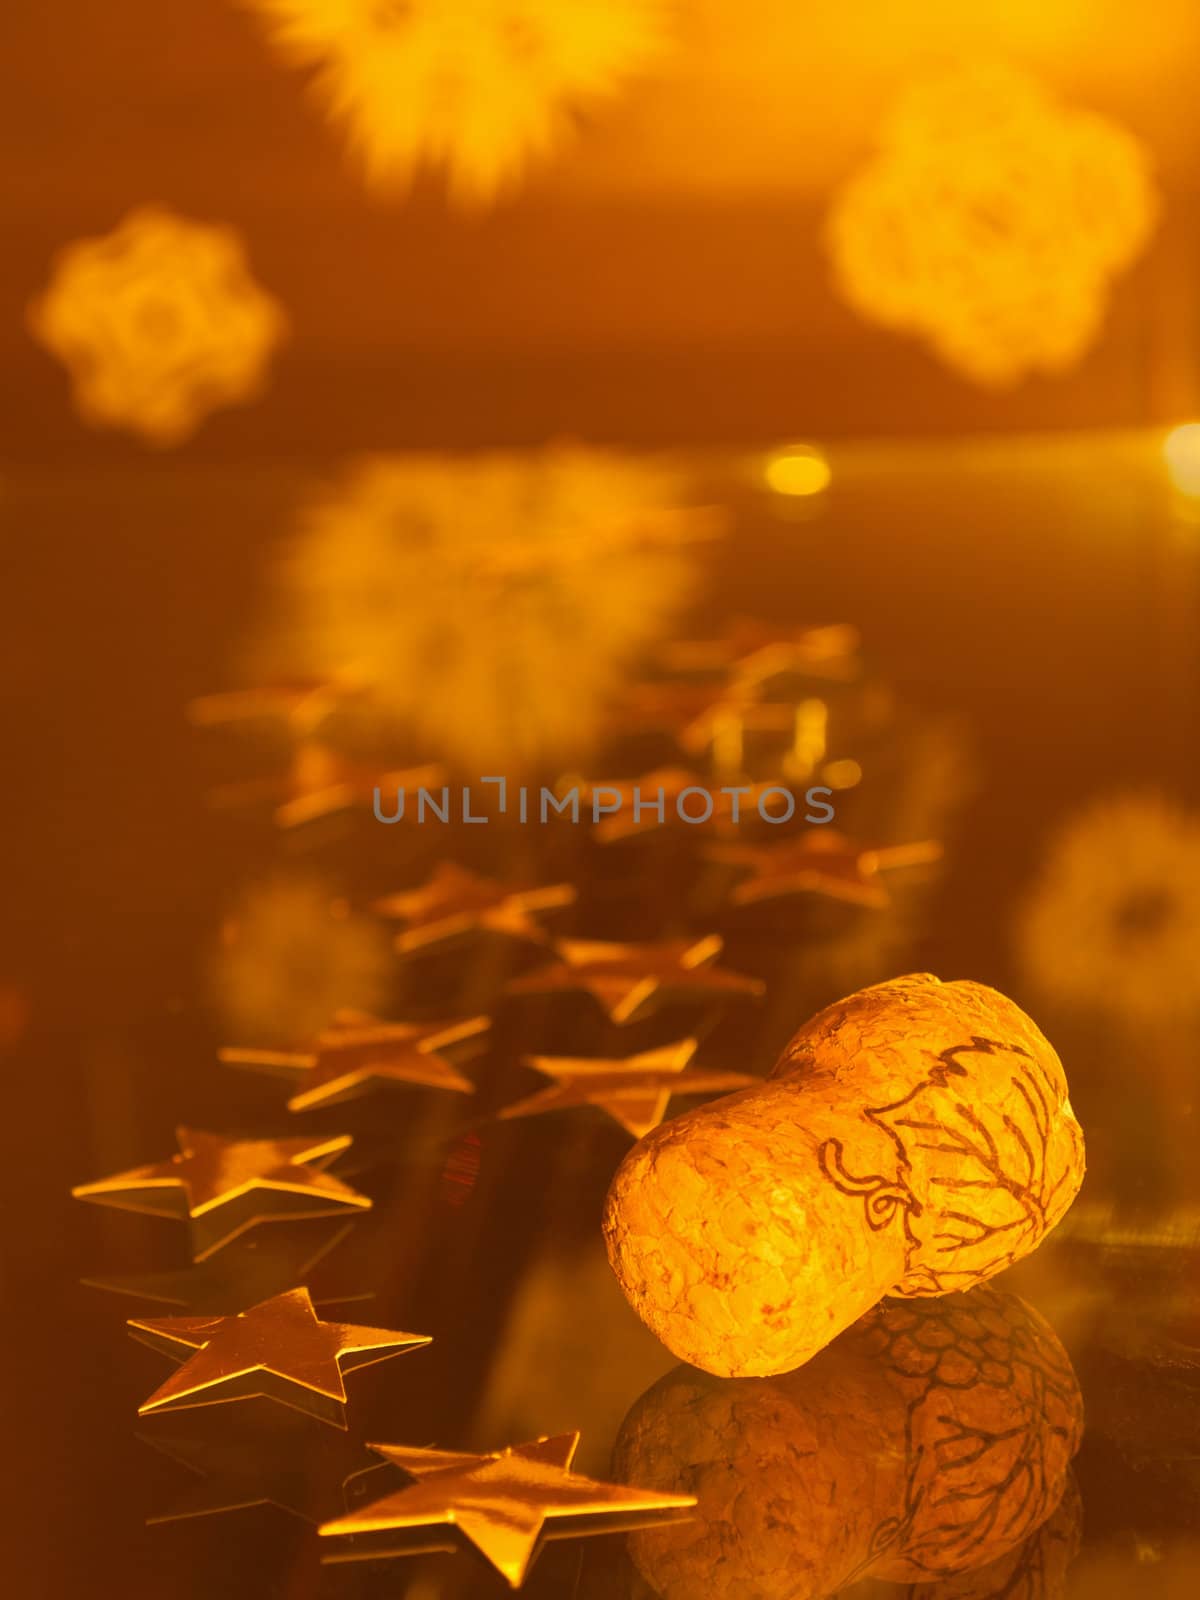 Champagne cork and golden stars lay on glass surface with paper snowflakes behind; focus on cork